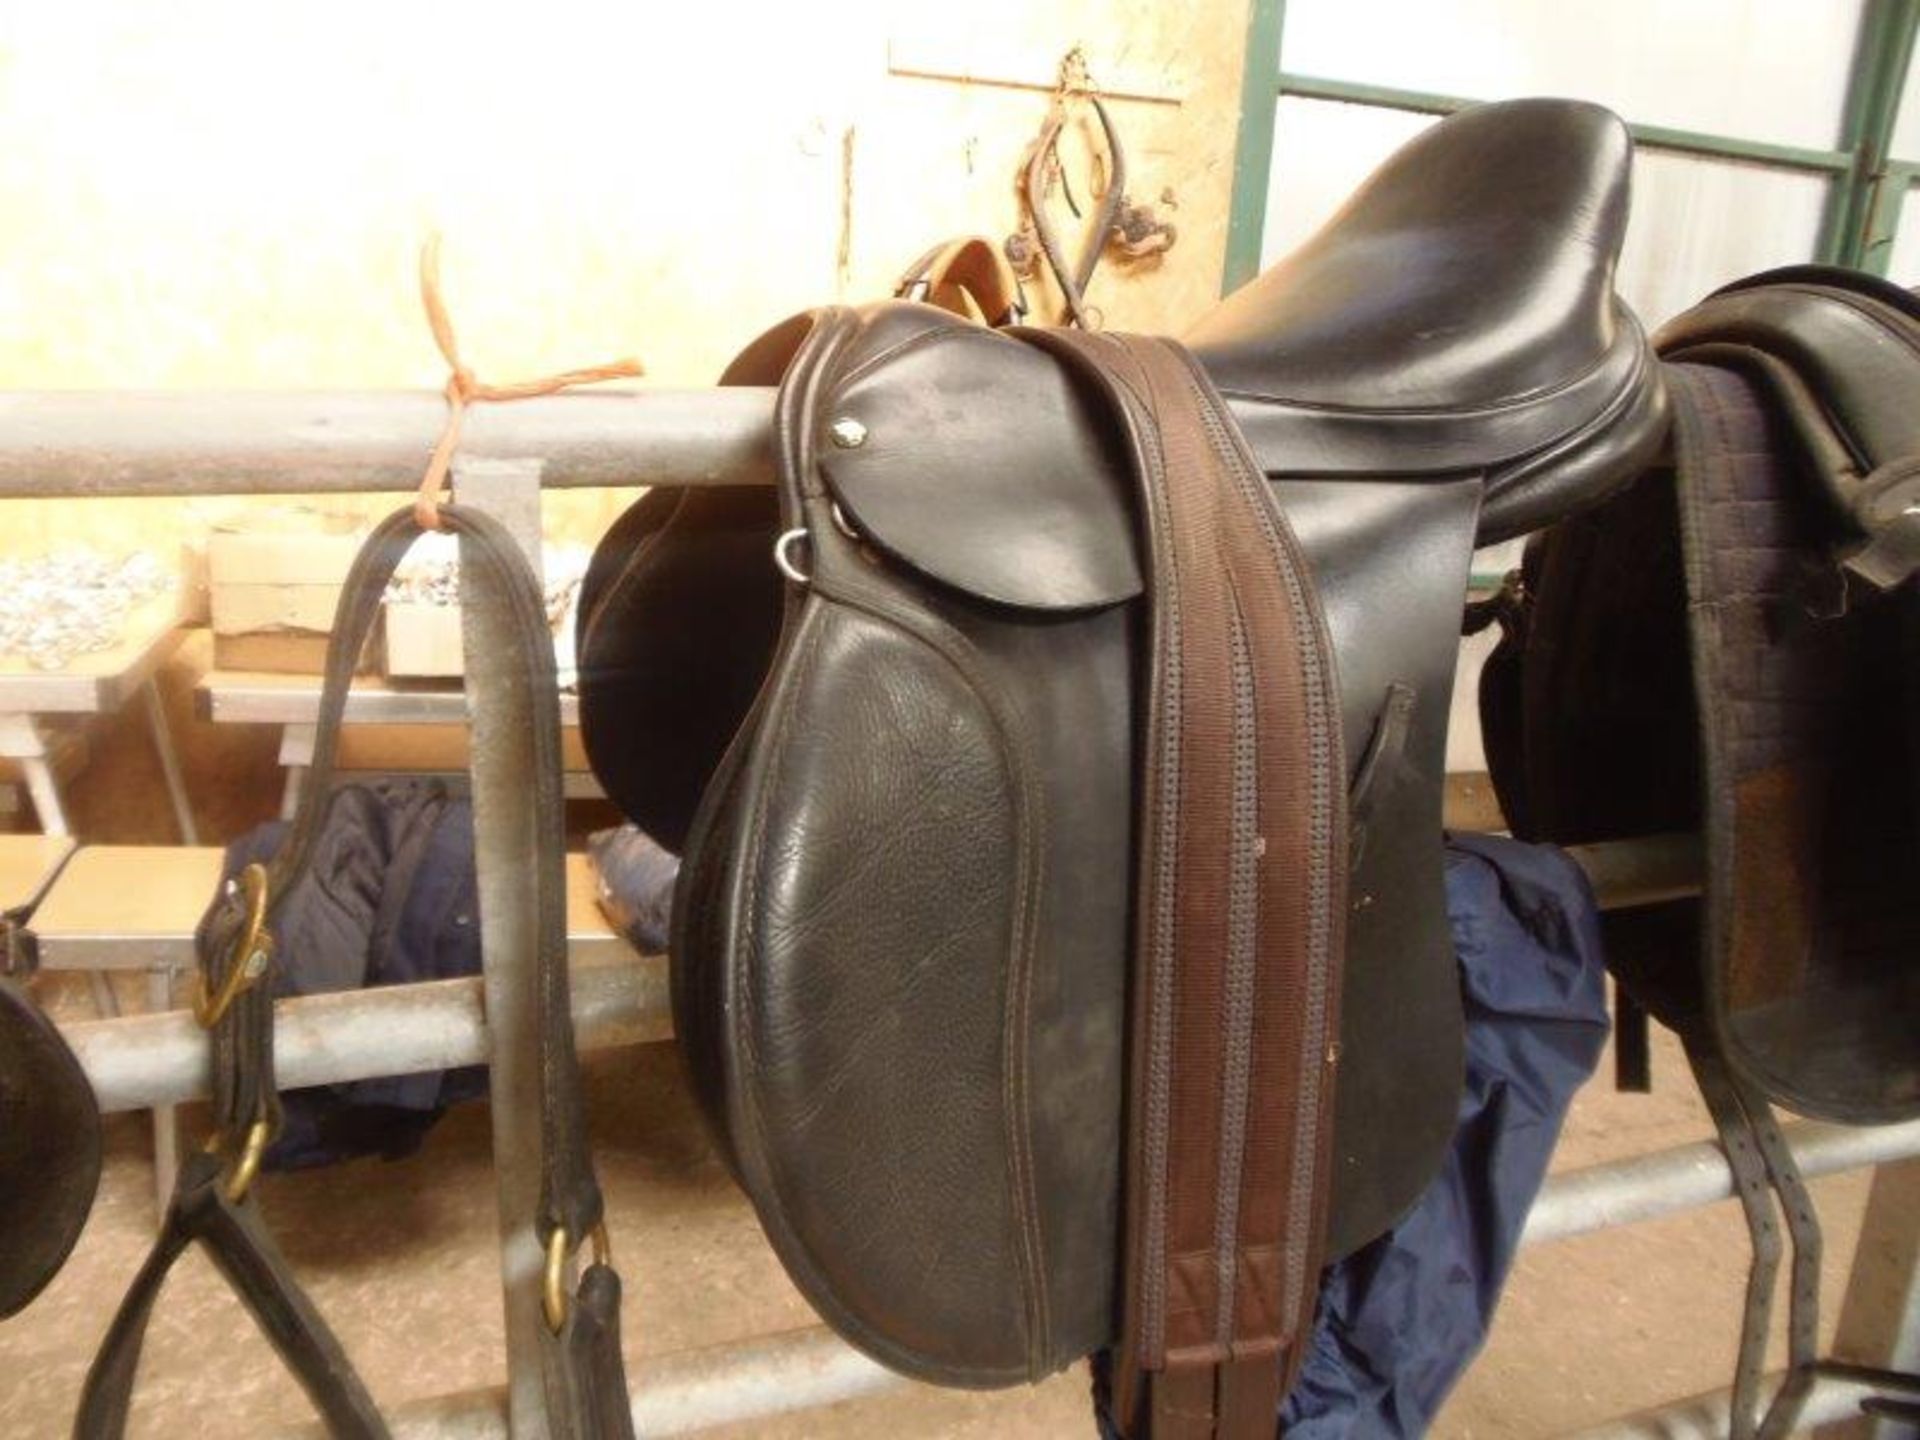 17" leather saddle by Tim James of Woodseaves with 60' girth